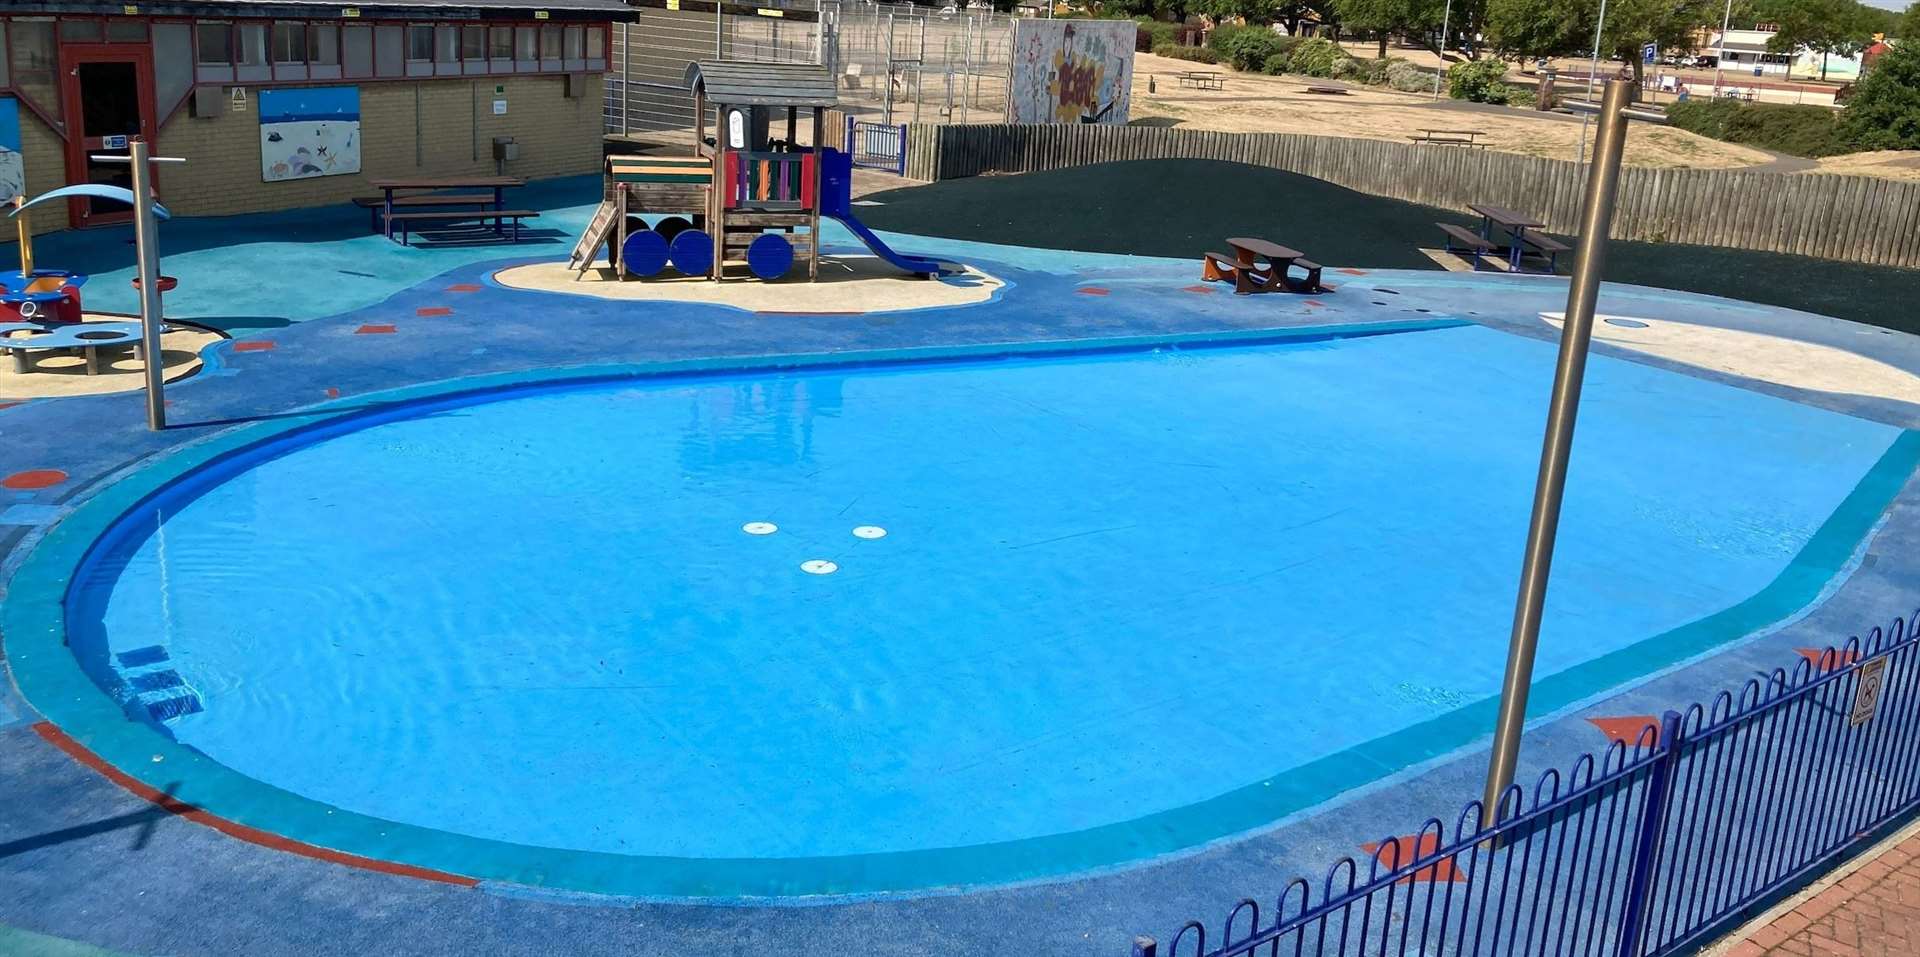 The paddling pool in Sheerness. Picture: Sheppey Leisure Complex